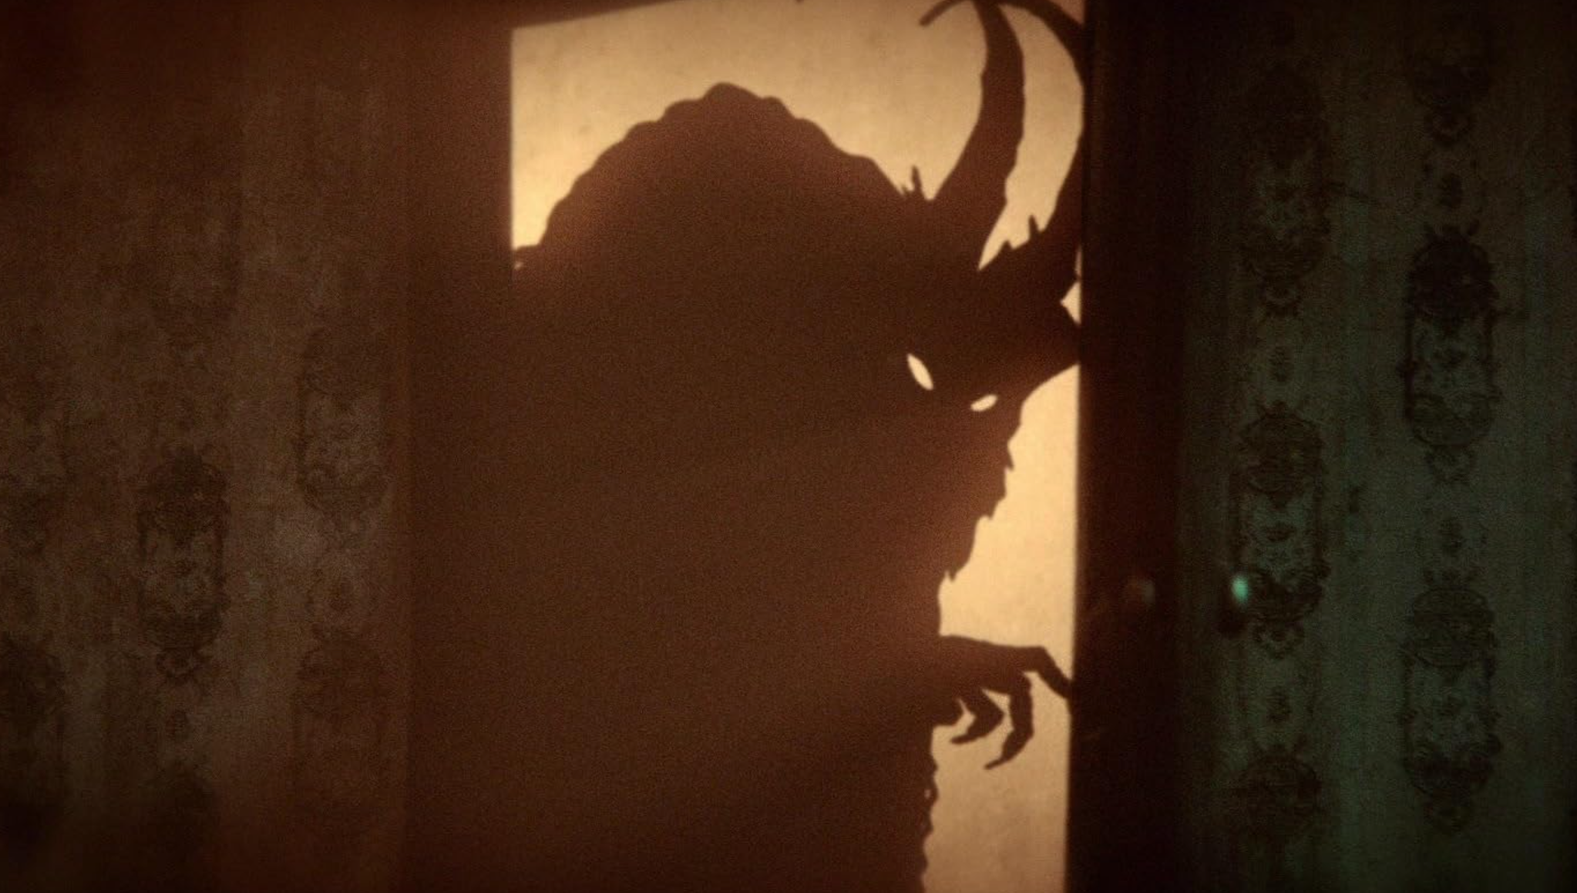 An image from the horror movie Krampus showing the titular Krampus silhouetted in a doorway.